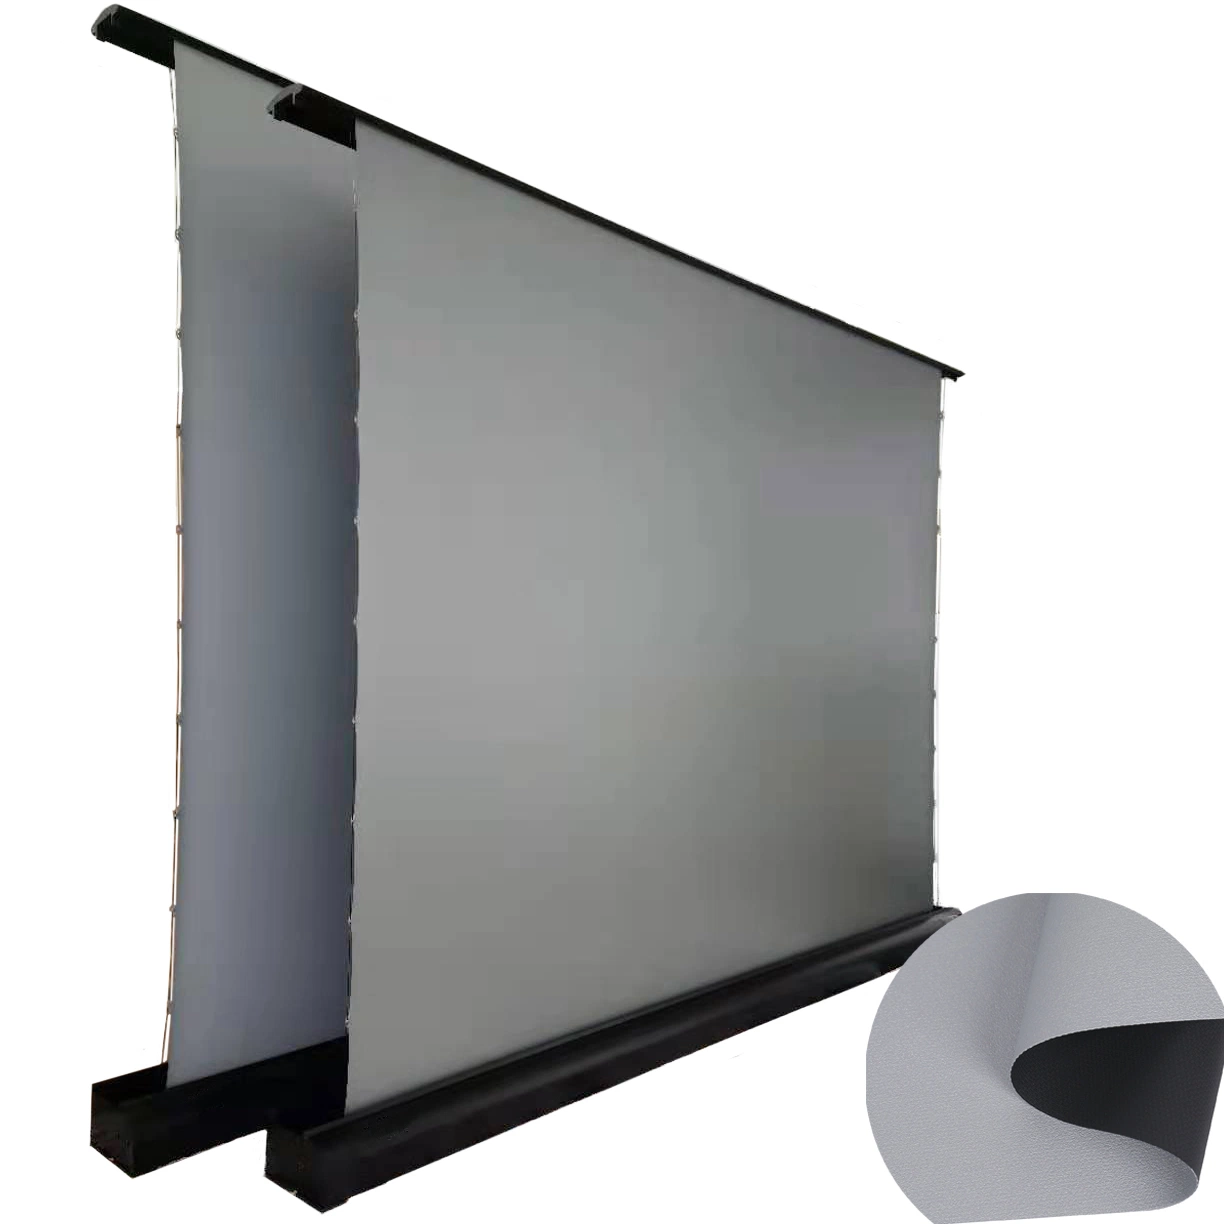 3.20m Silver Movie Screen Projection Fabric Projection Screen Fabric